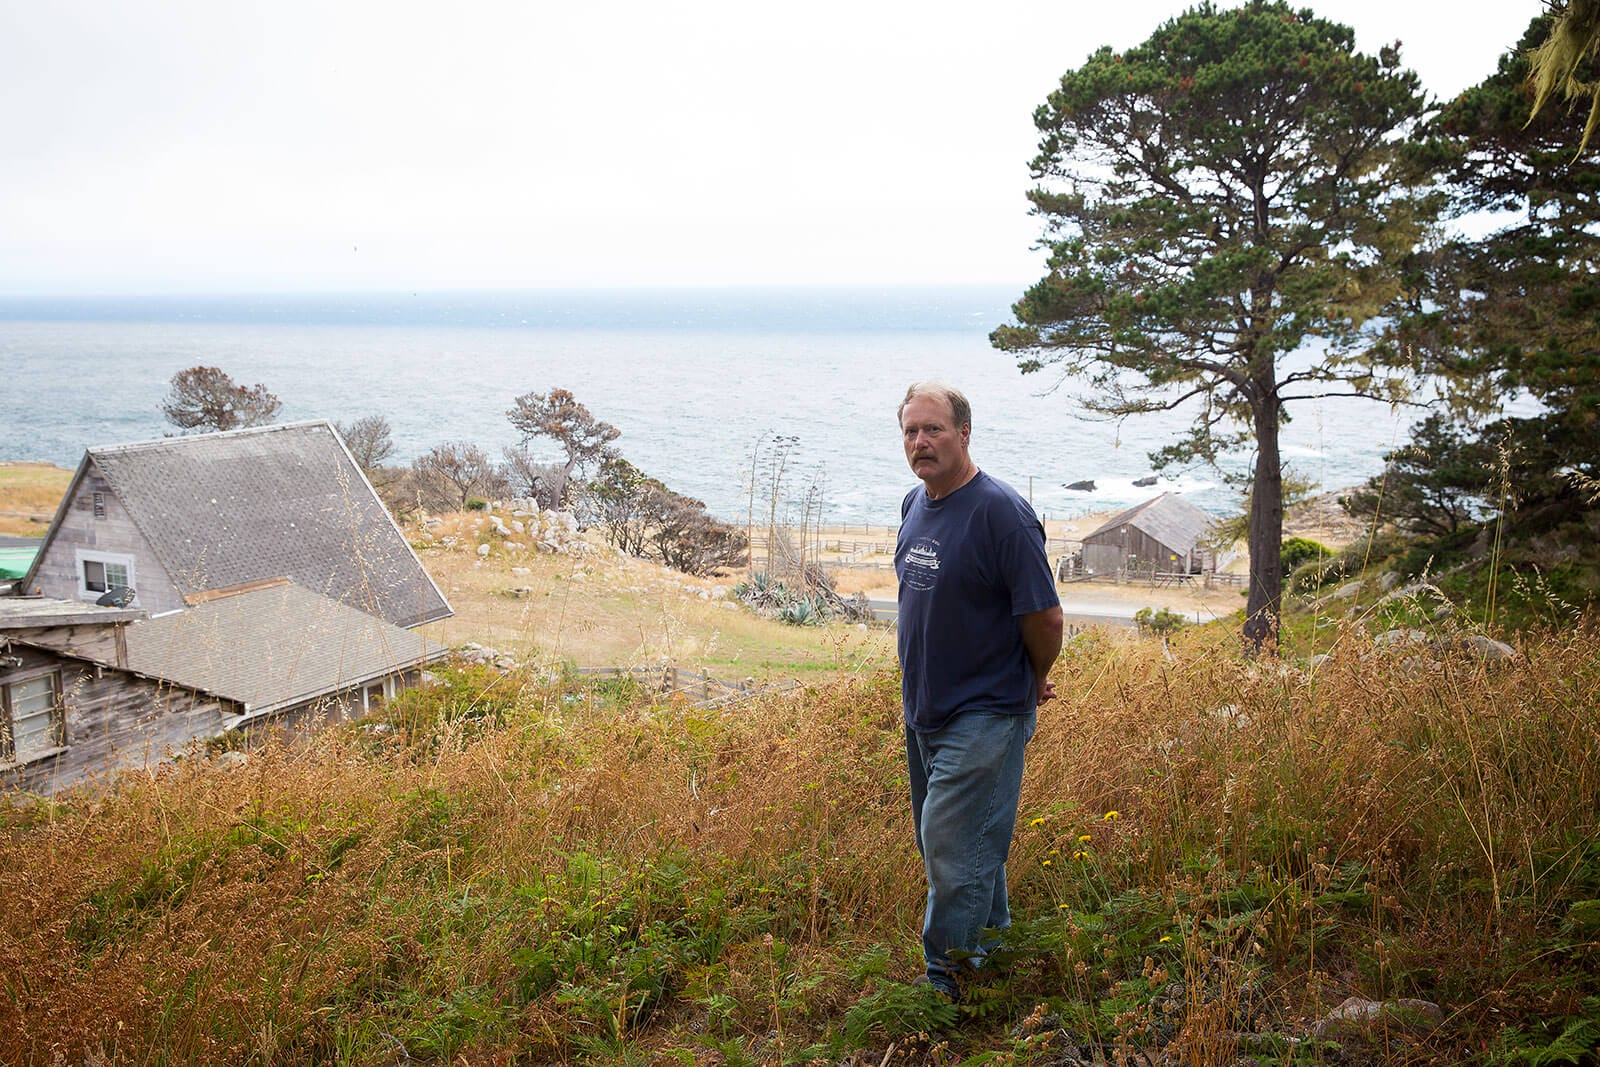 A man standing in a grassy area near the ocean.